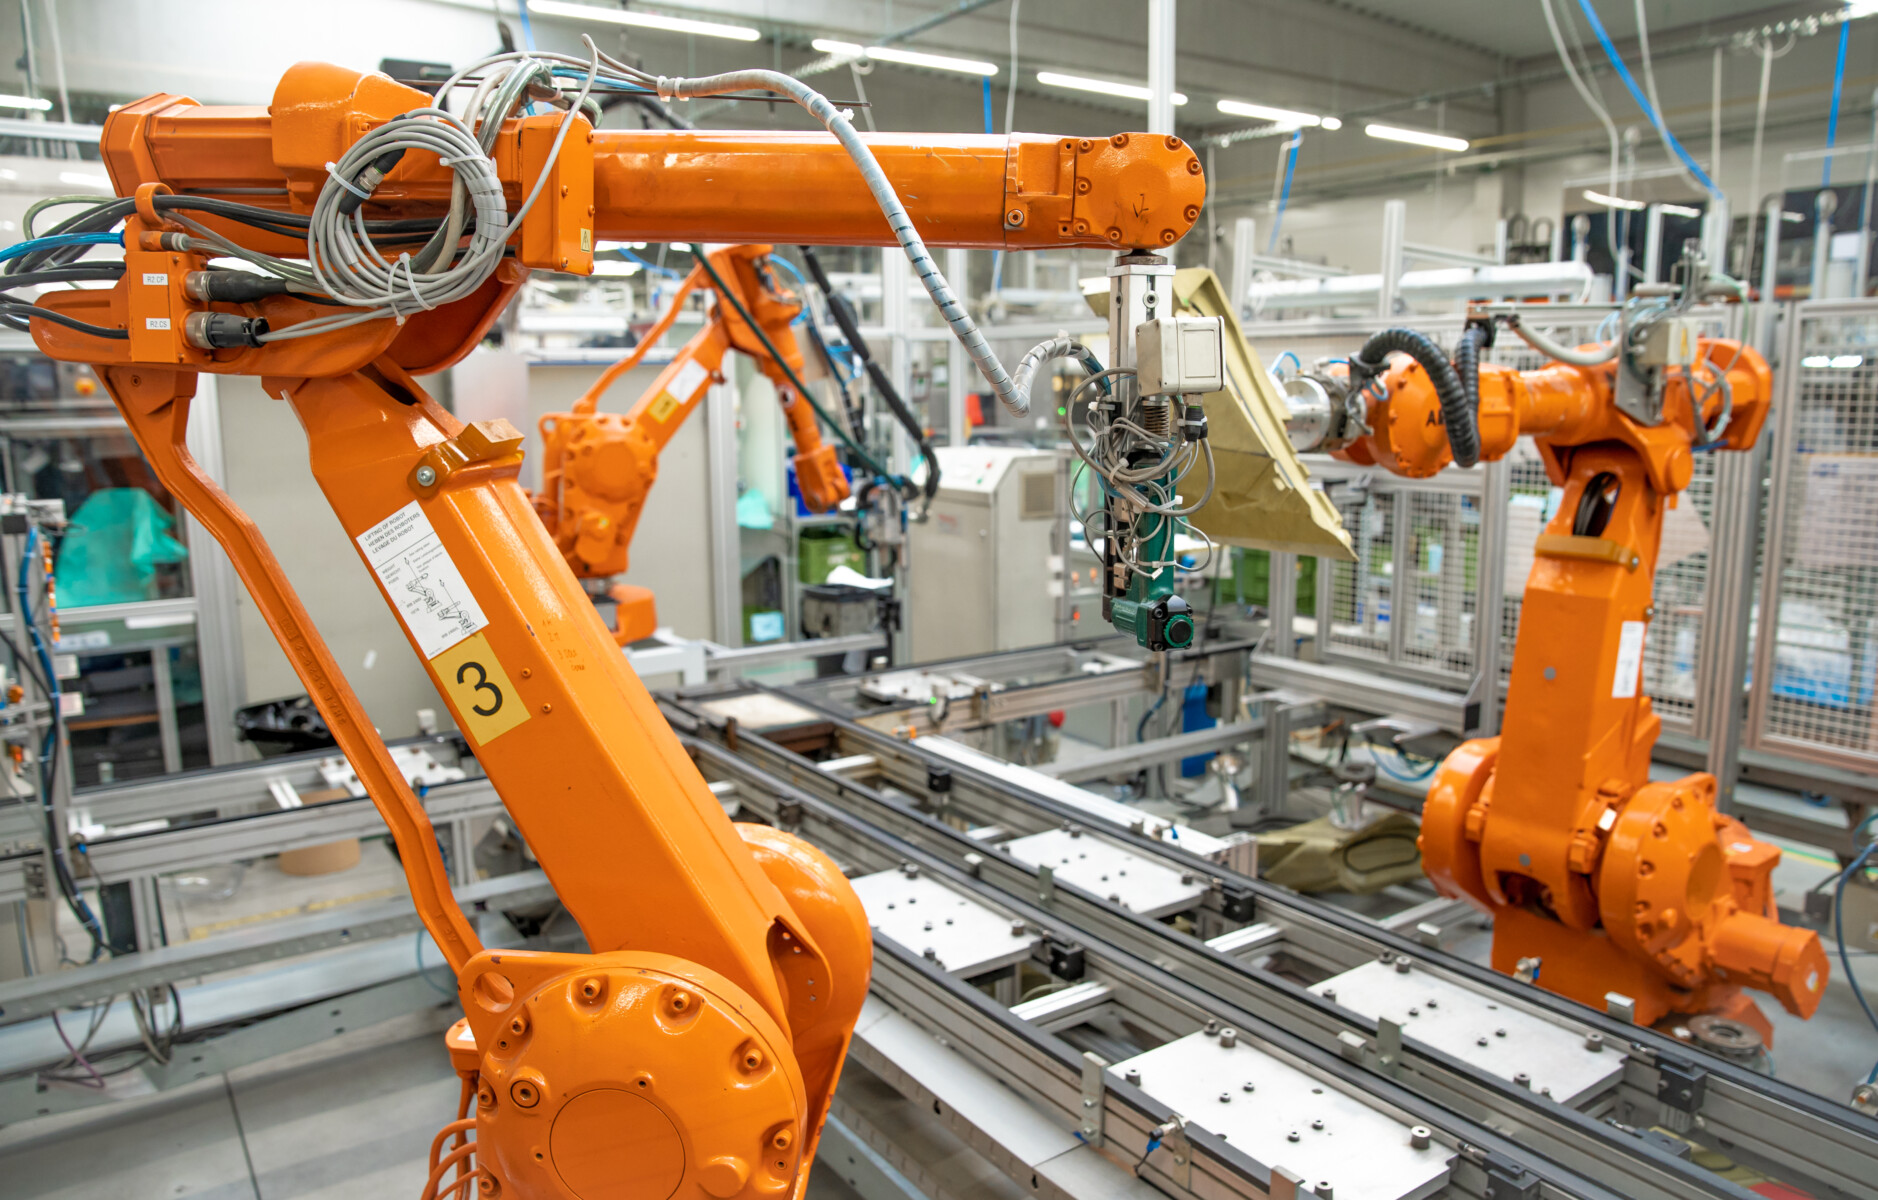 robotization of modern industry in the factory. New program industry 4.0